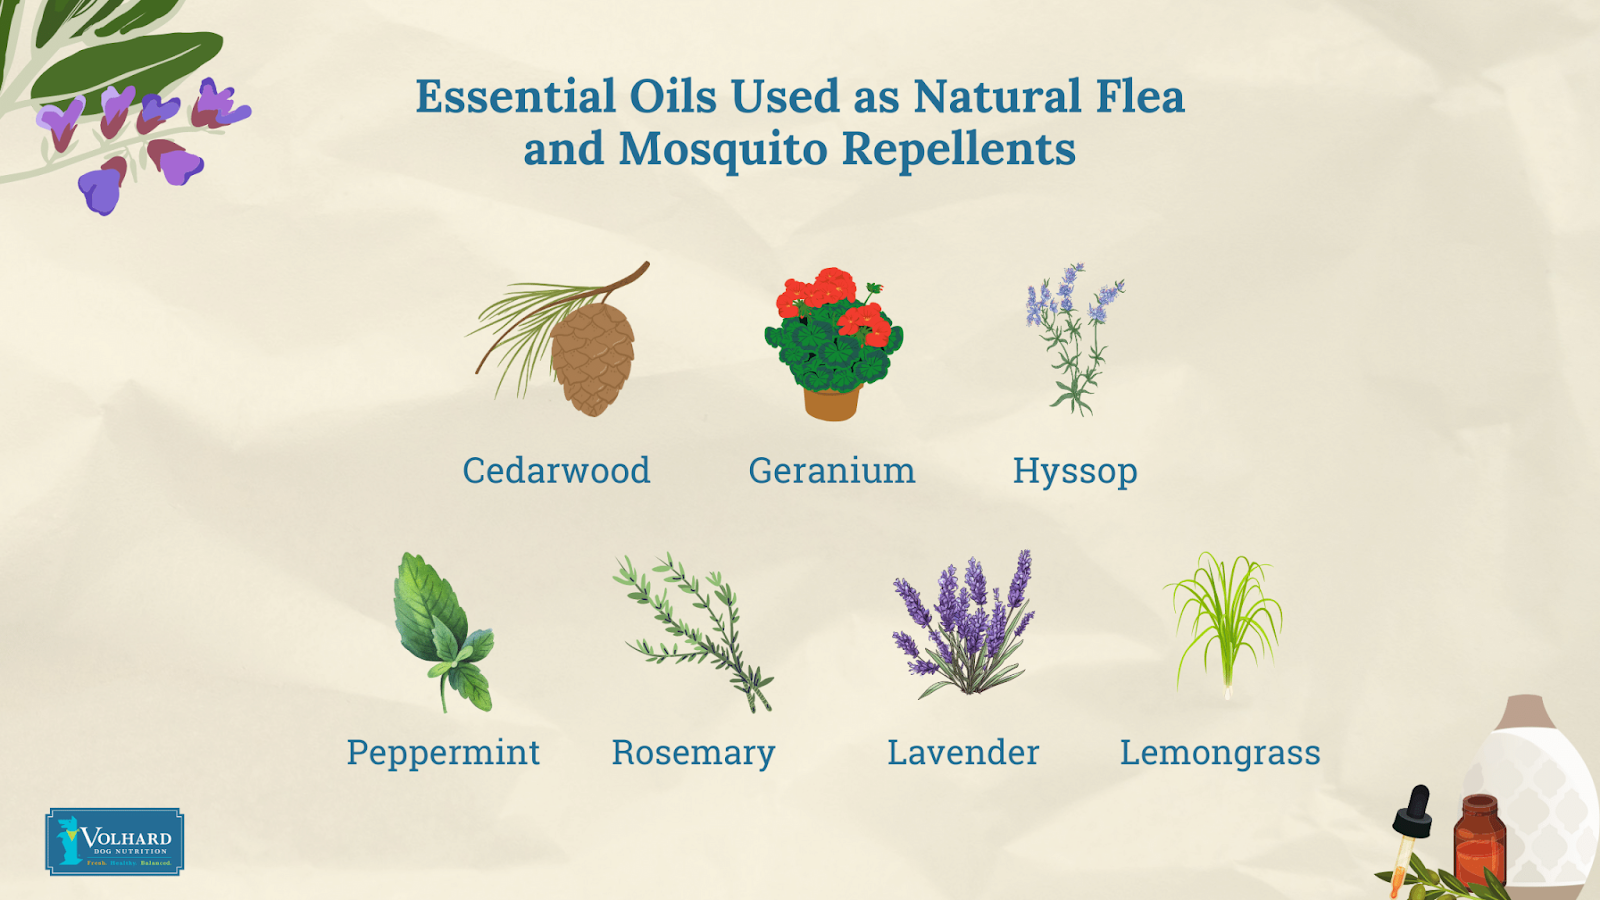 Essential oils as natural flea and mosquito repellents